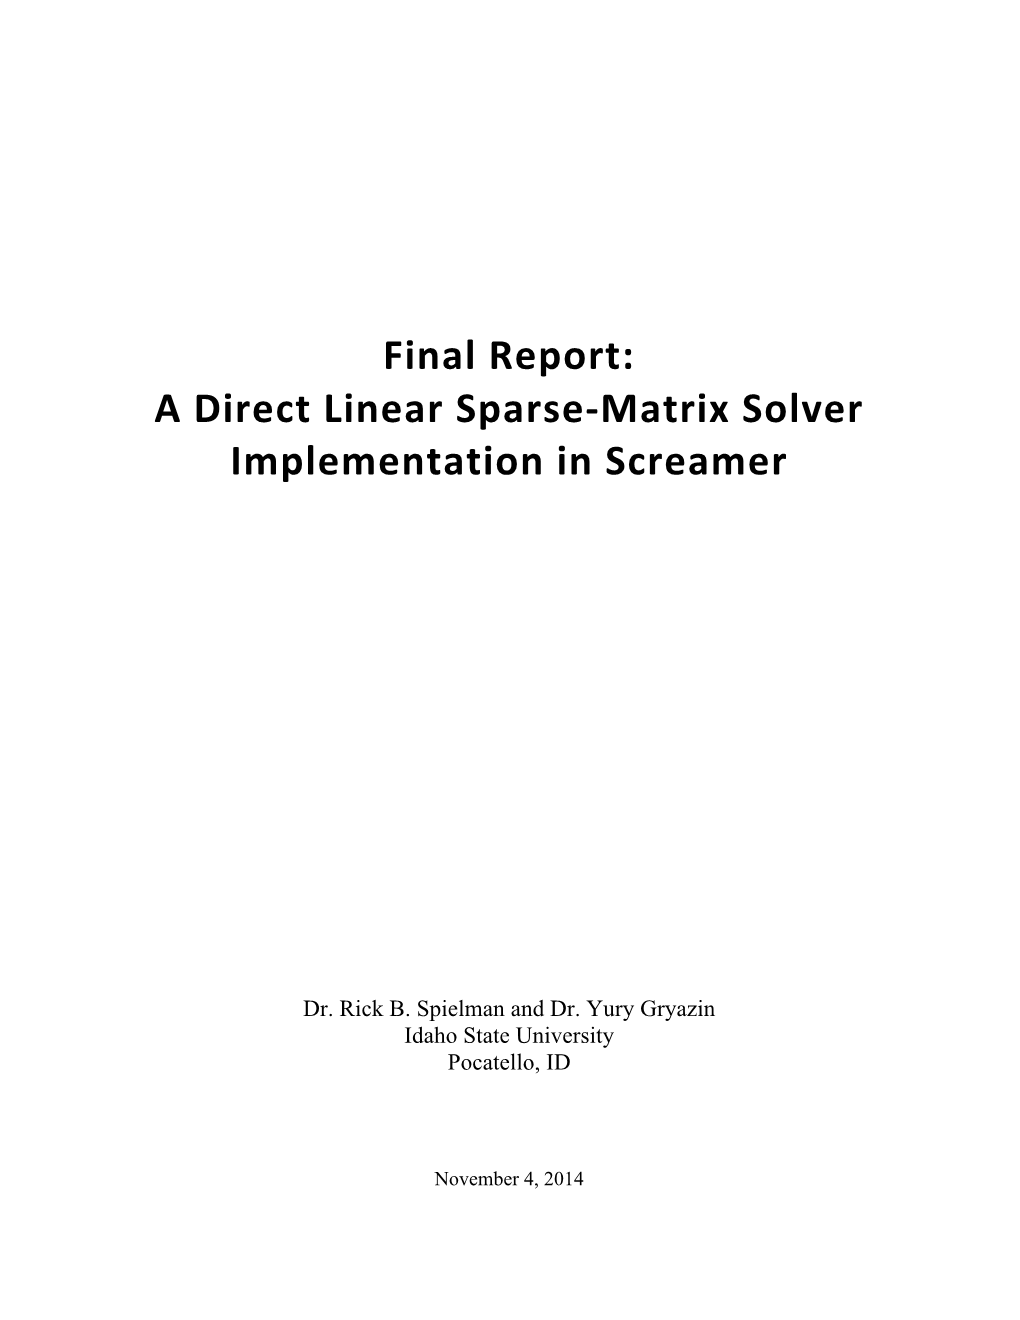 A Direct Linear Sparse-Matrix Solver Implementation in Screamer